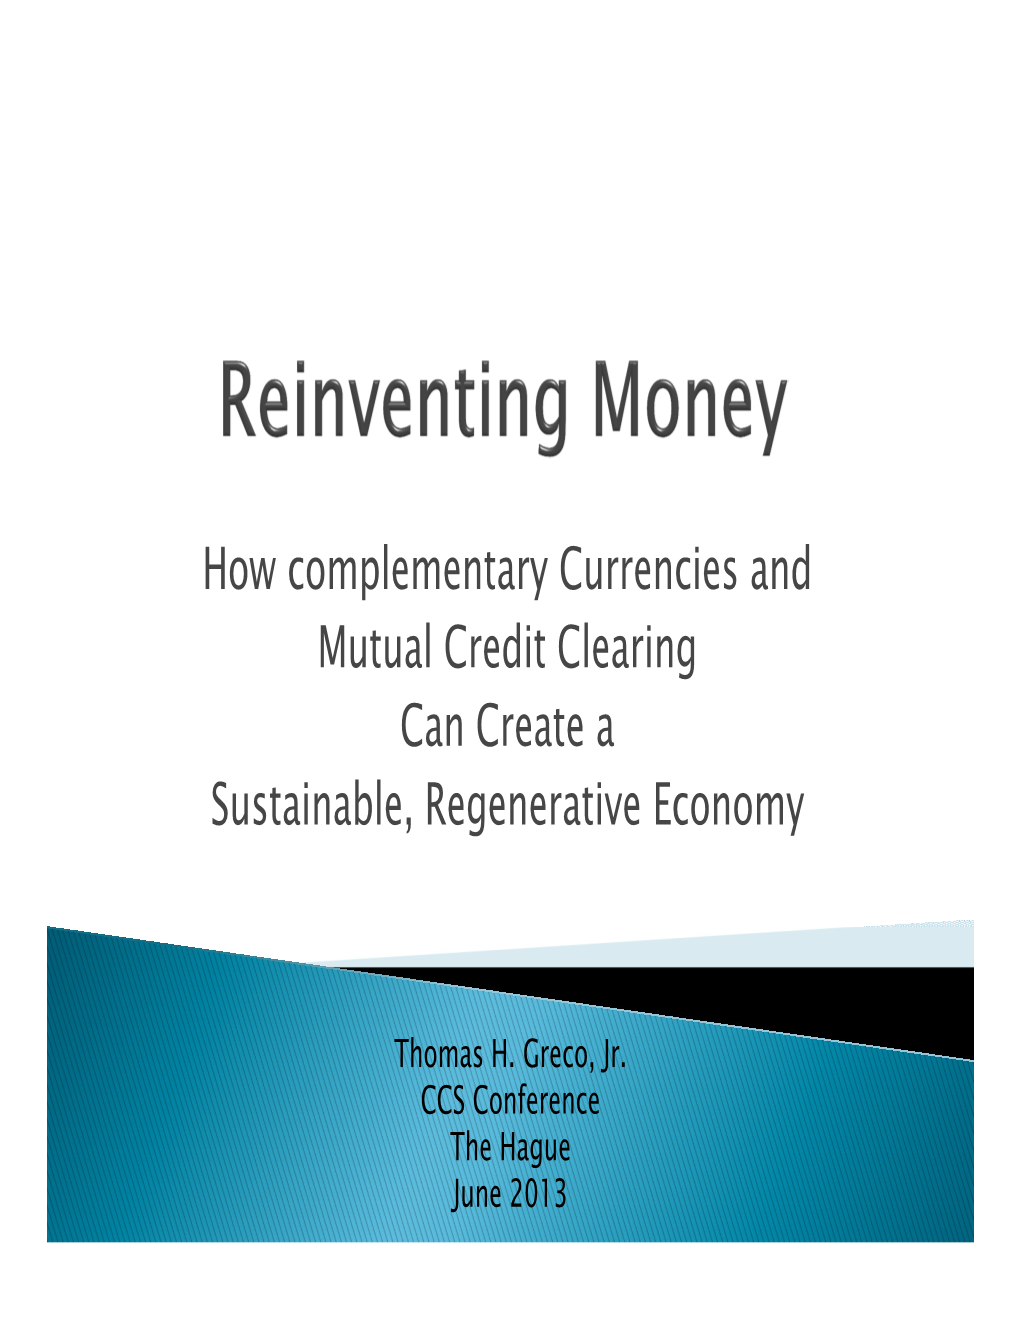 How Complementary Currencies and Mutual Credit Clearing Can Create a Sustainable, Regenerative Economy